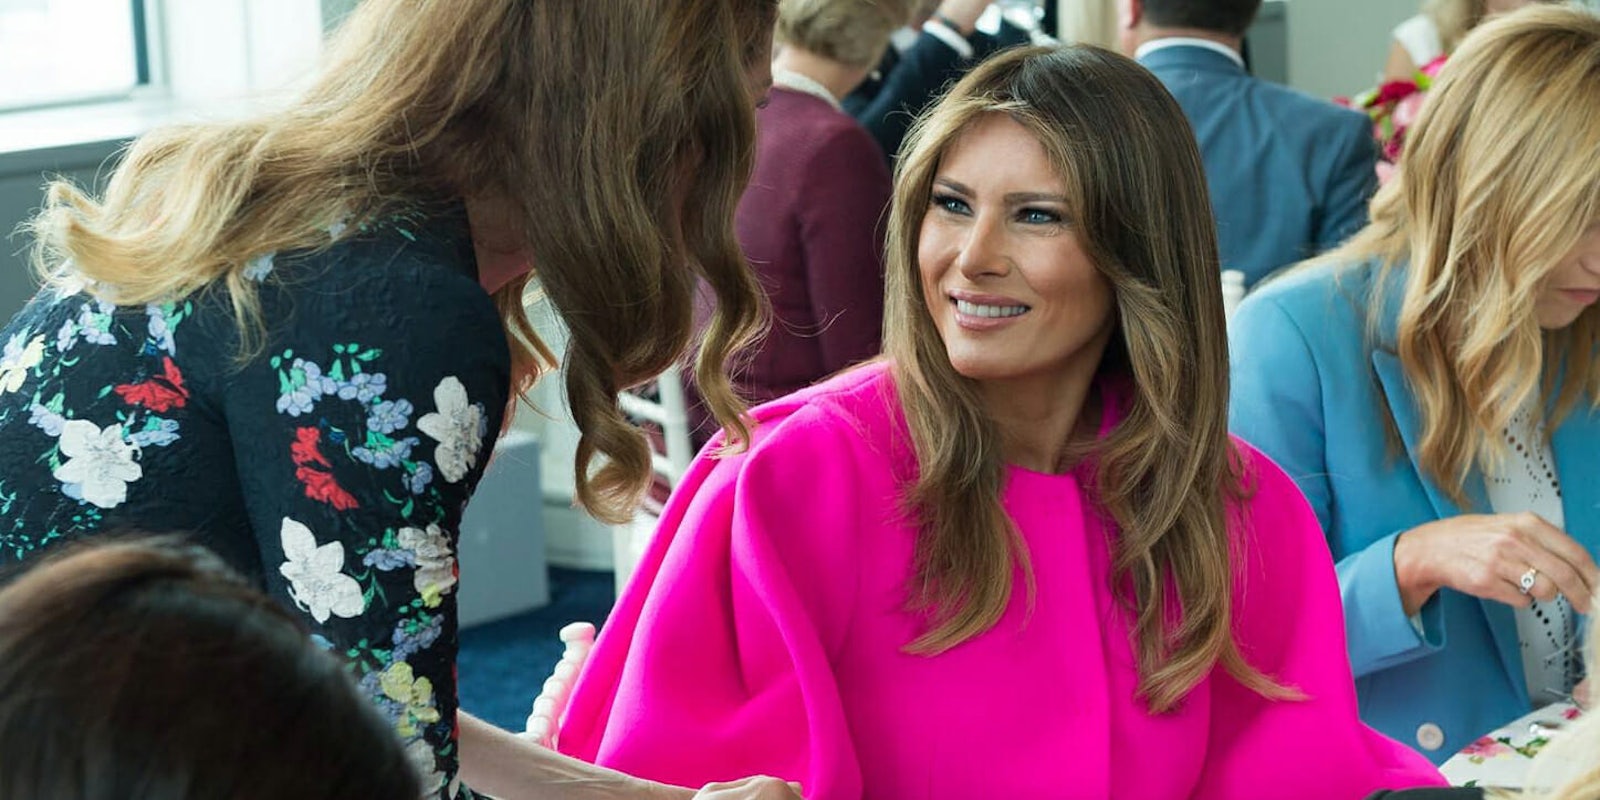 The parents of First Lady Melania Trump most likely used the process known as 'chain migration' on their path to becoming legal residents in the United States, according to a new report.